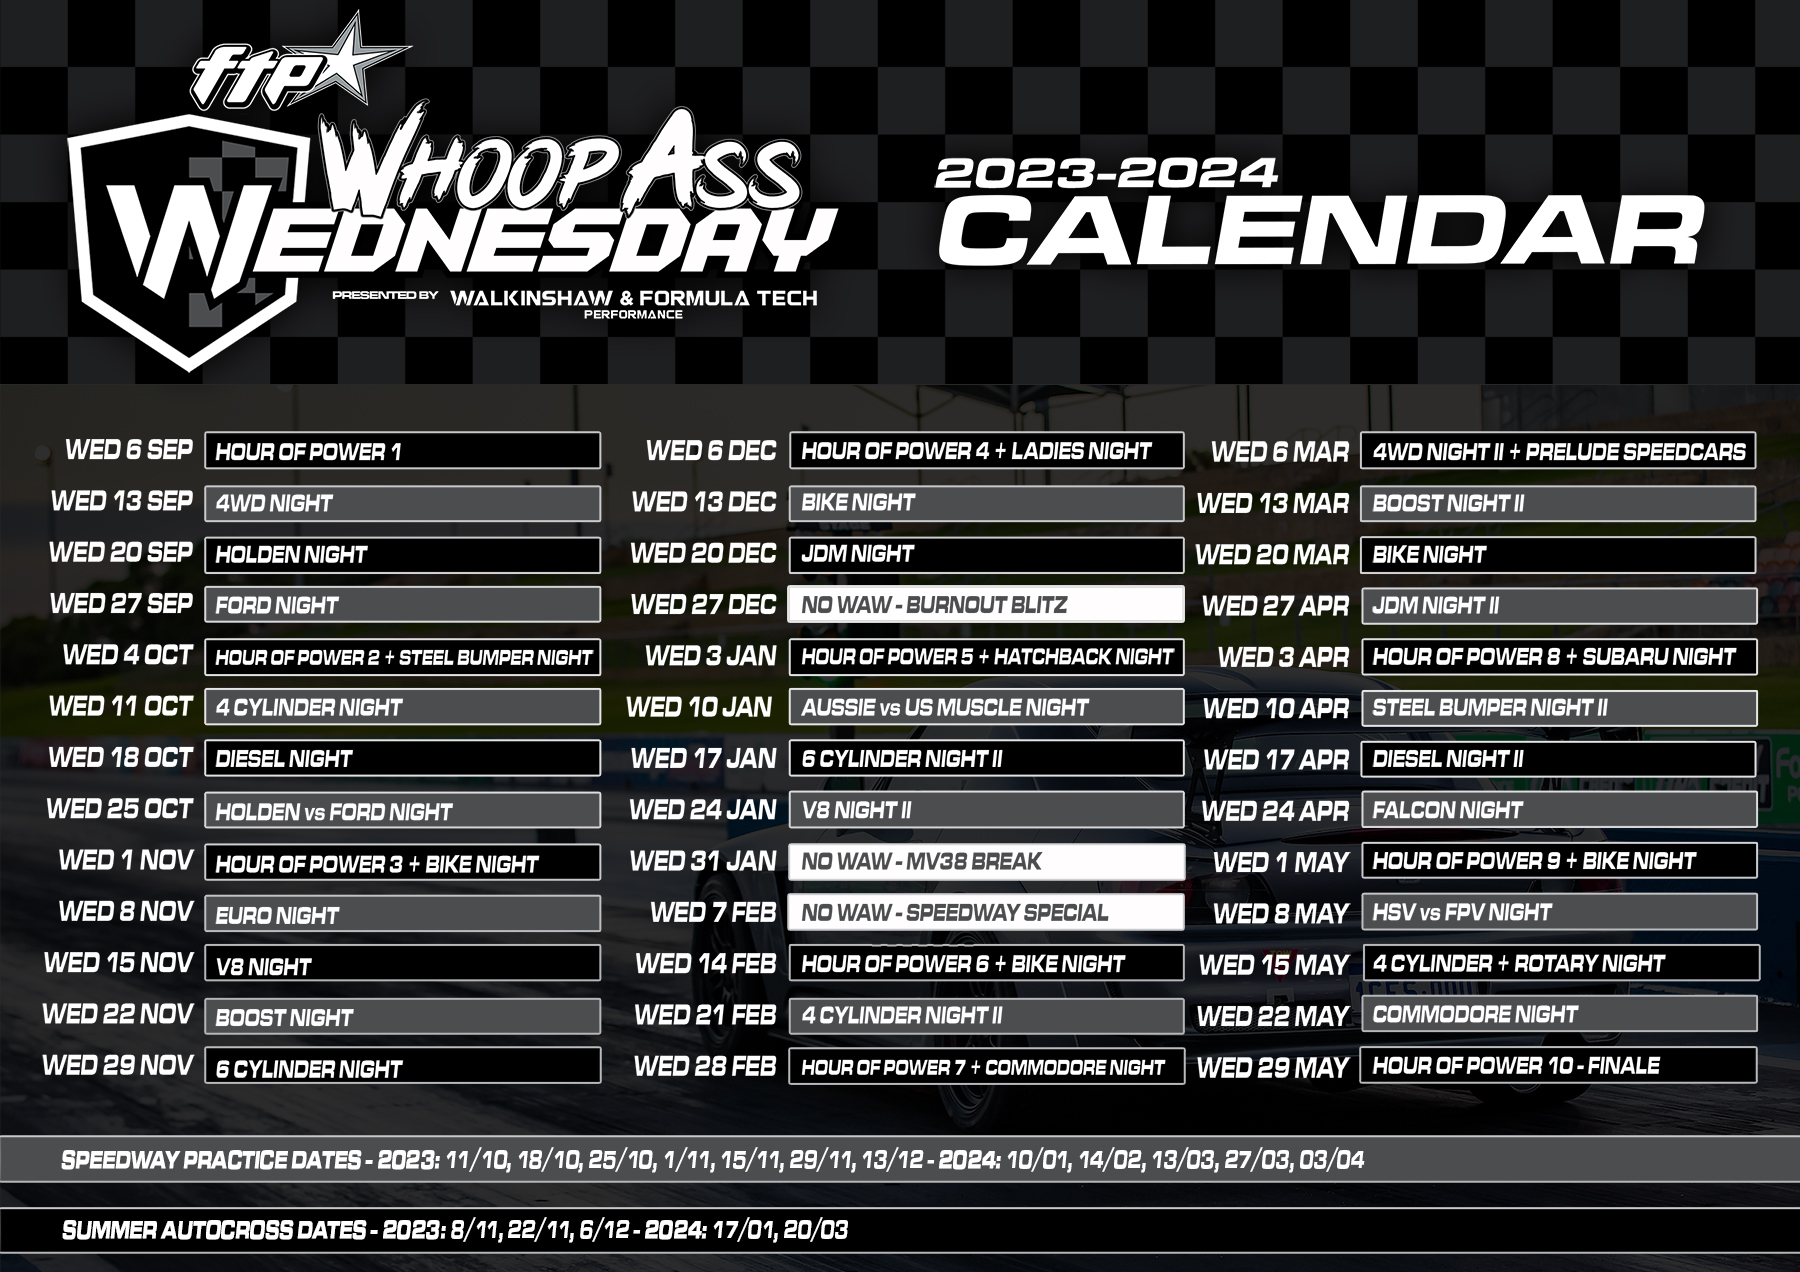 Whoop Ass Wednesday is back for 2023-24!